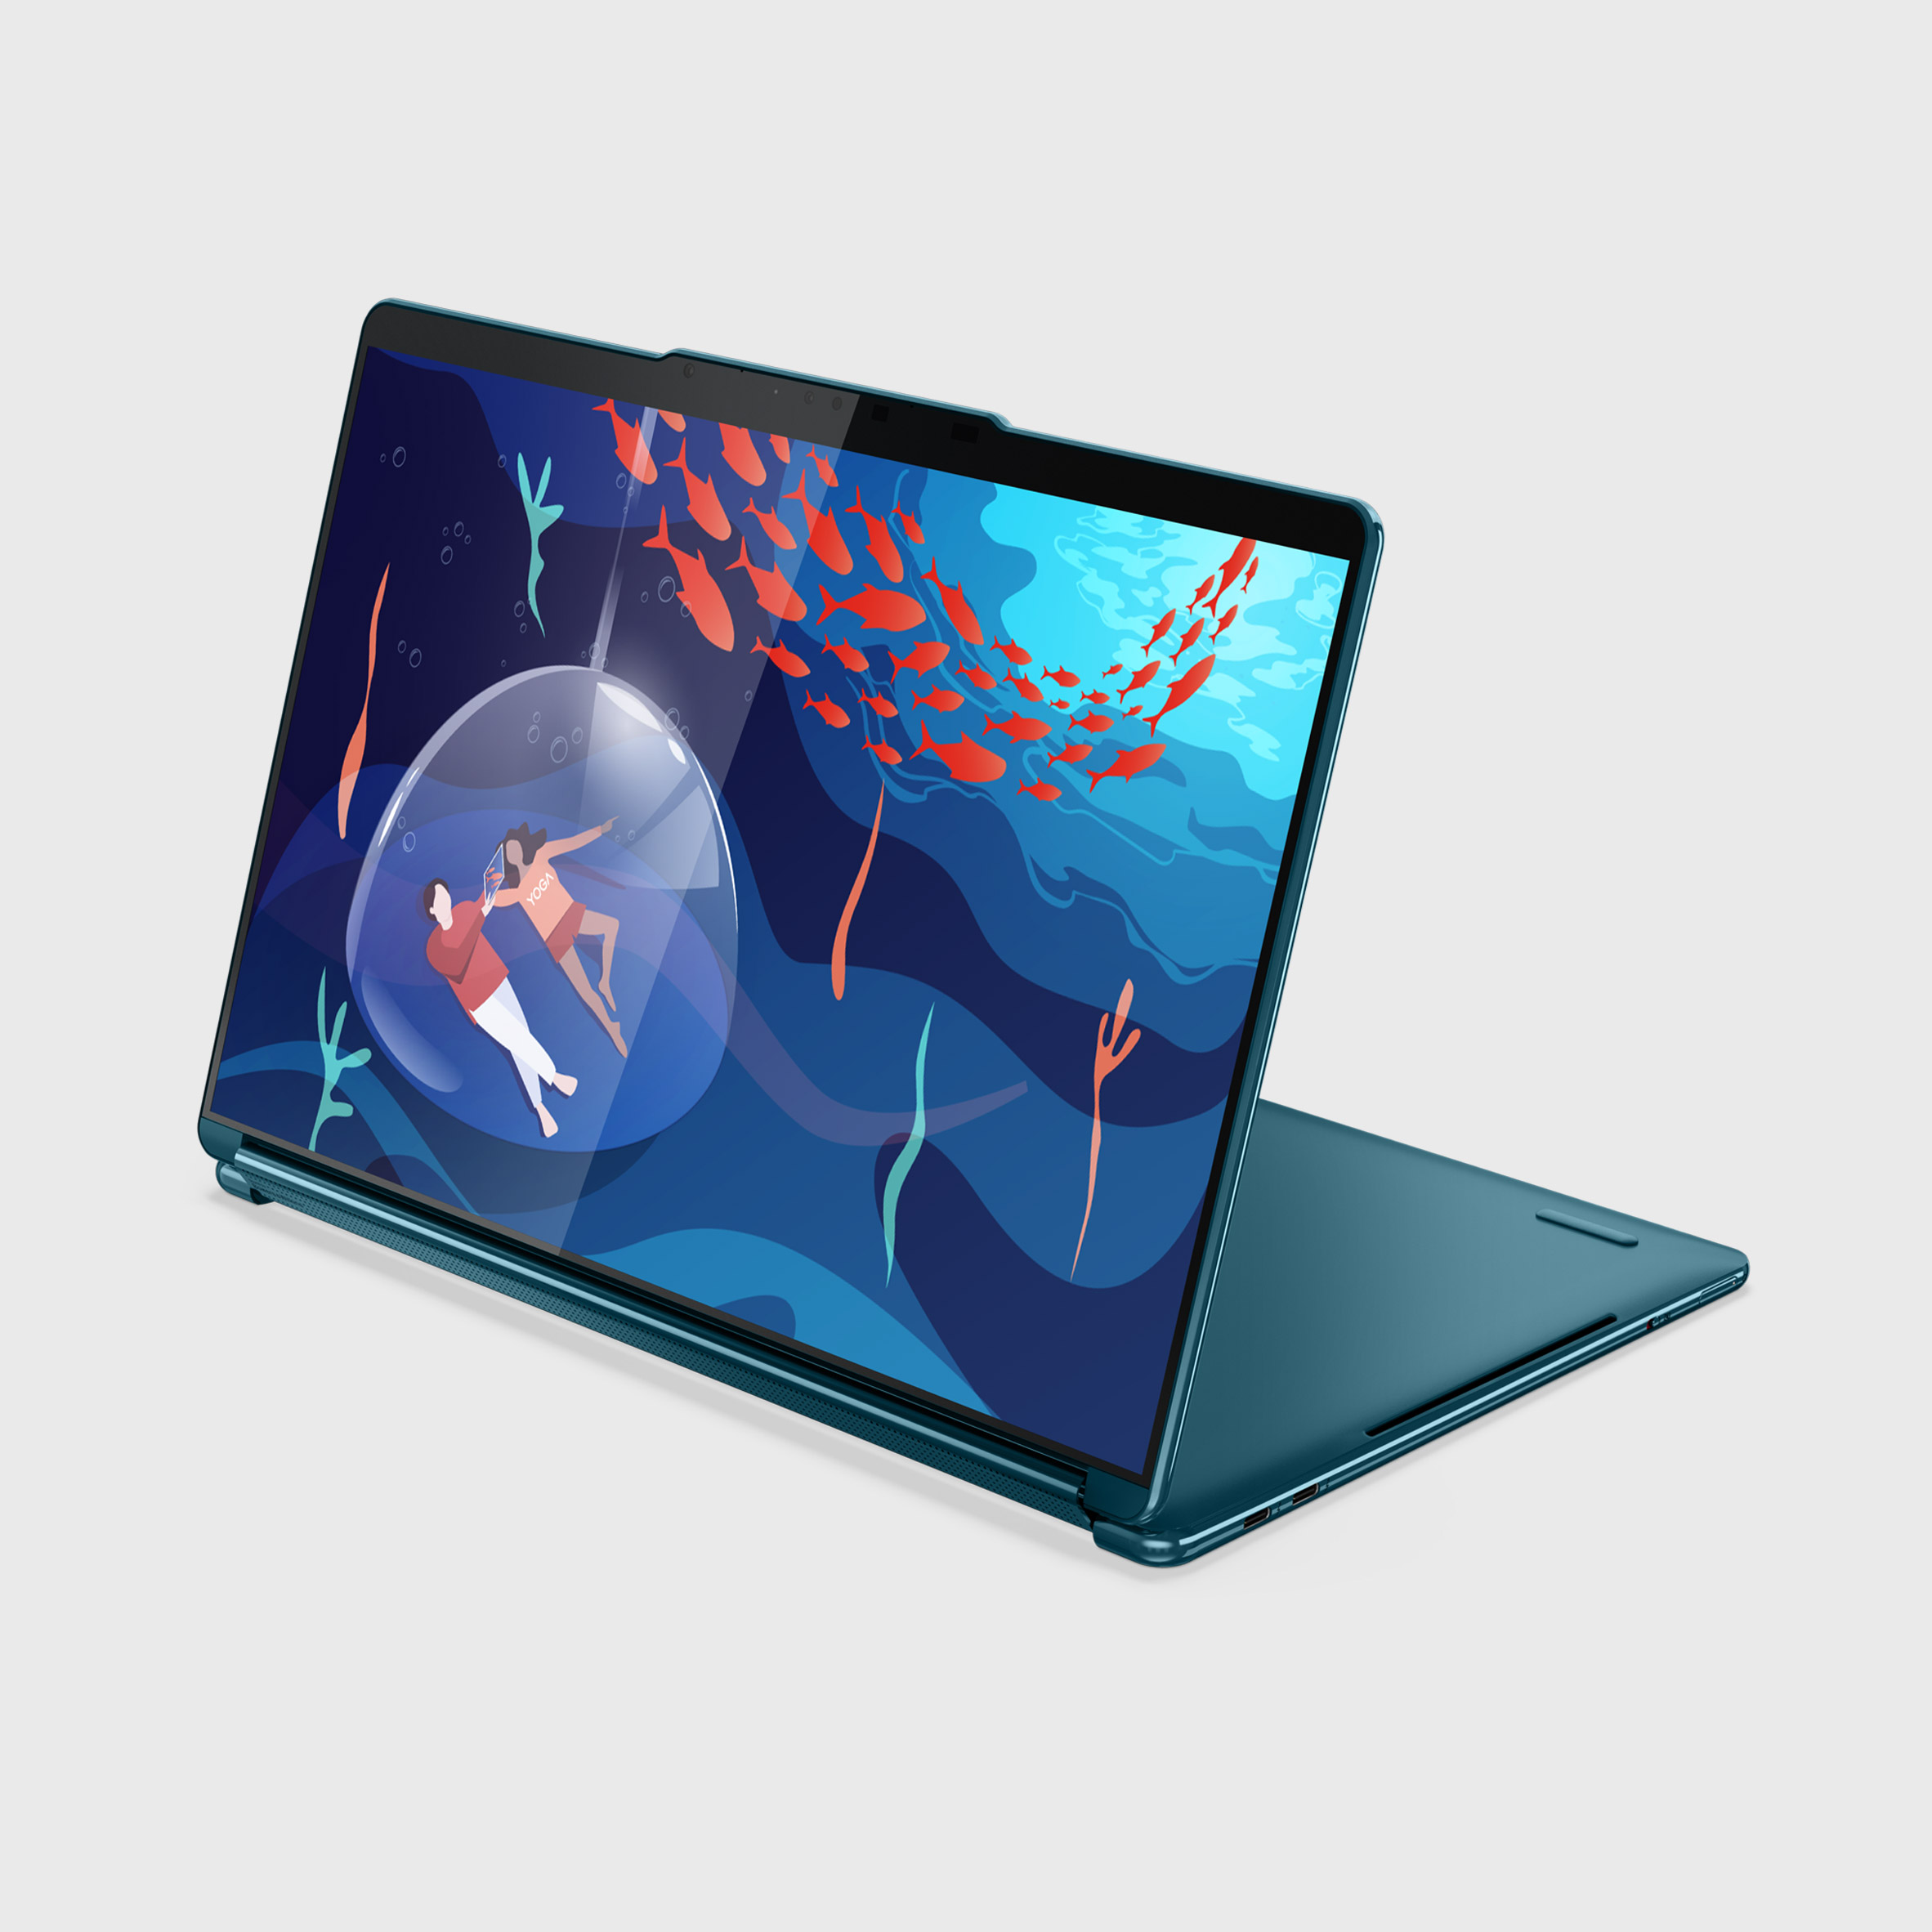 Lenovo unveils folding laptop Yoga Book 9i with two full-sized screens